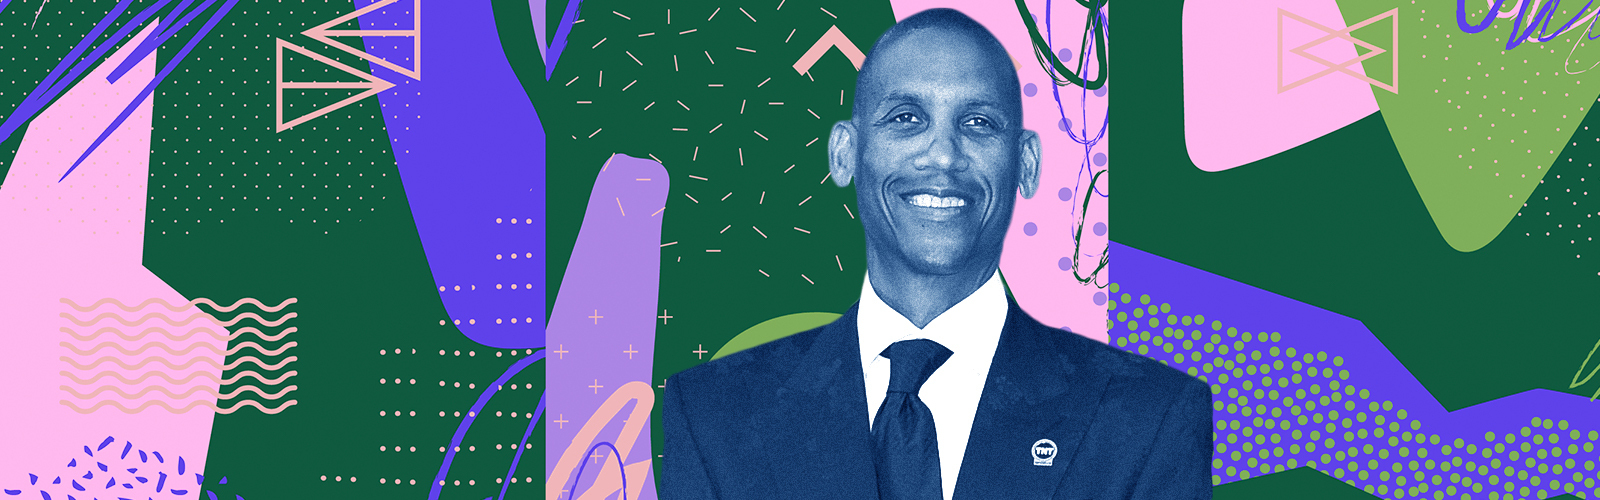 Reggie Miller Explains Why He’s All About Uplifting The Next Generation Instead Of Being Bitter